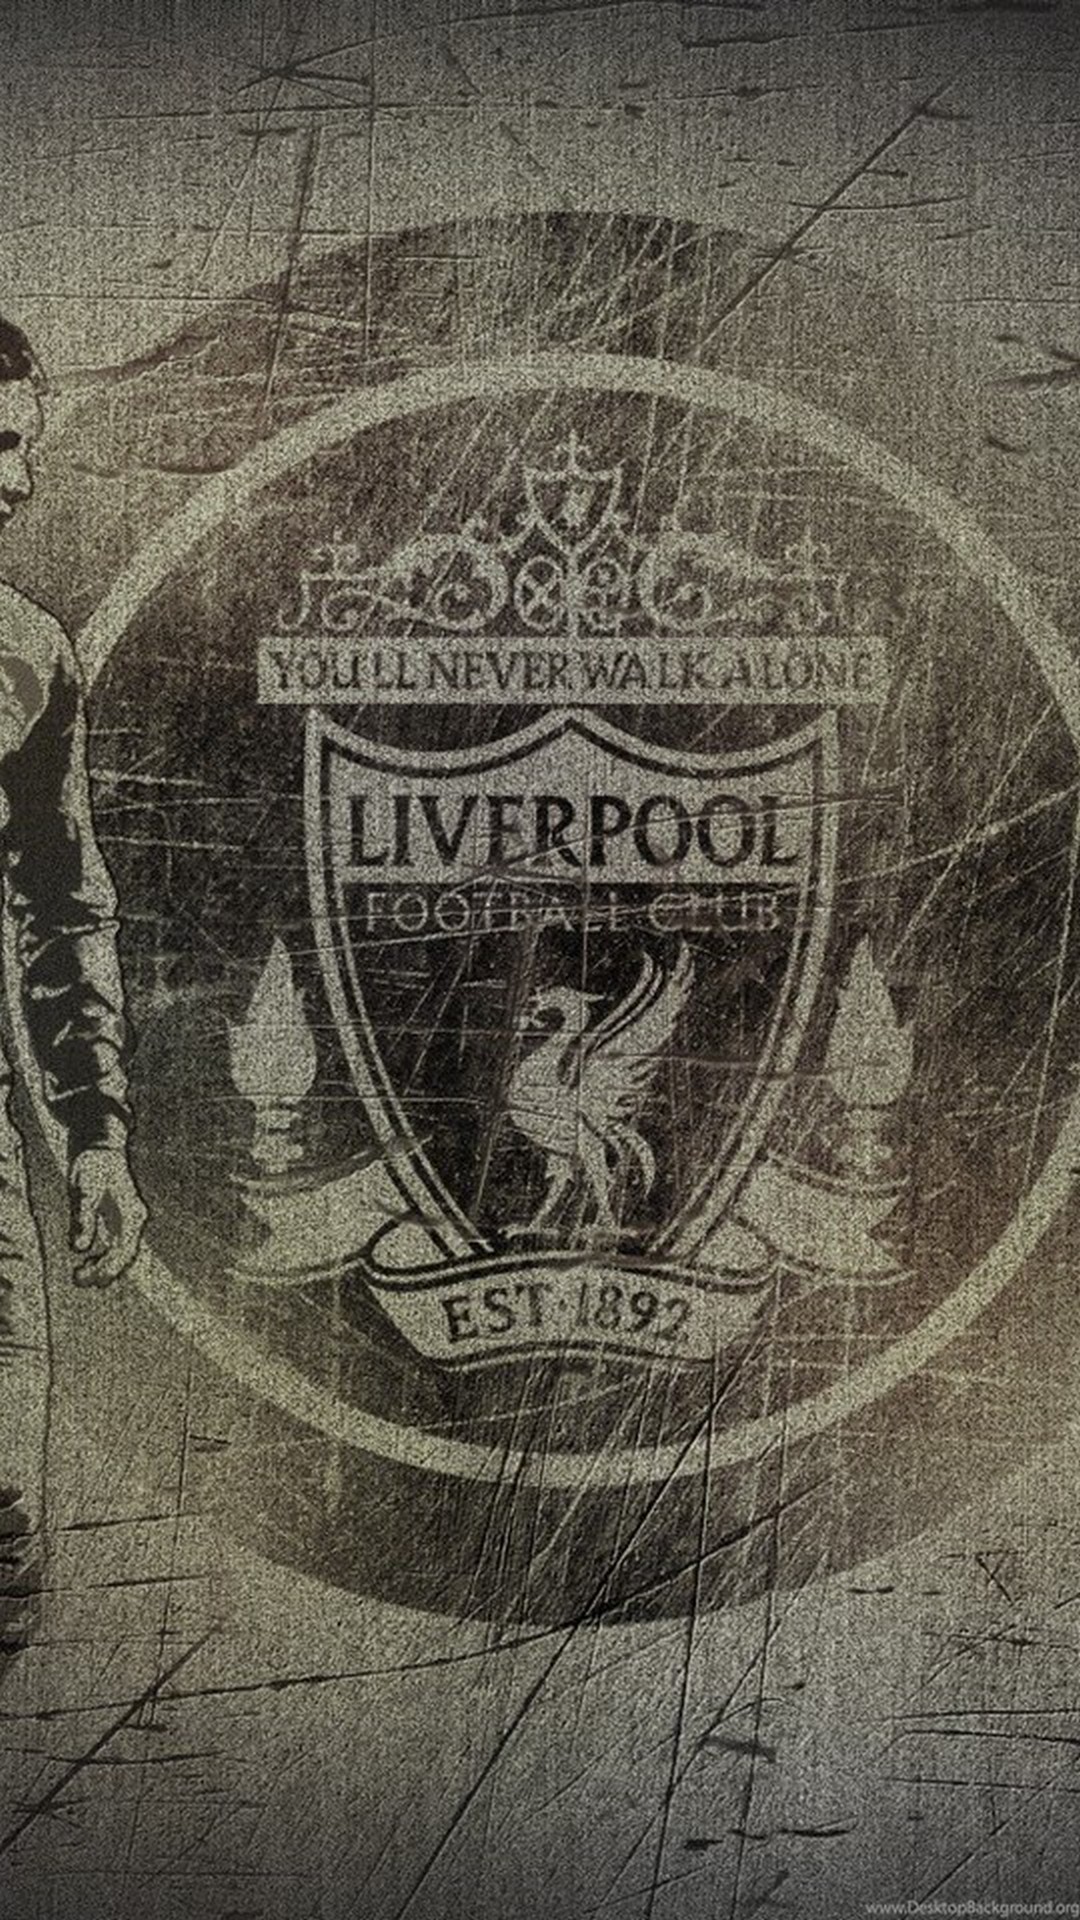 Liverpool HD Wallpaper For Android With High Resolution Wallpaper Phone HD